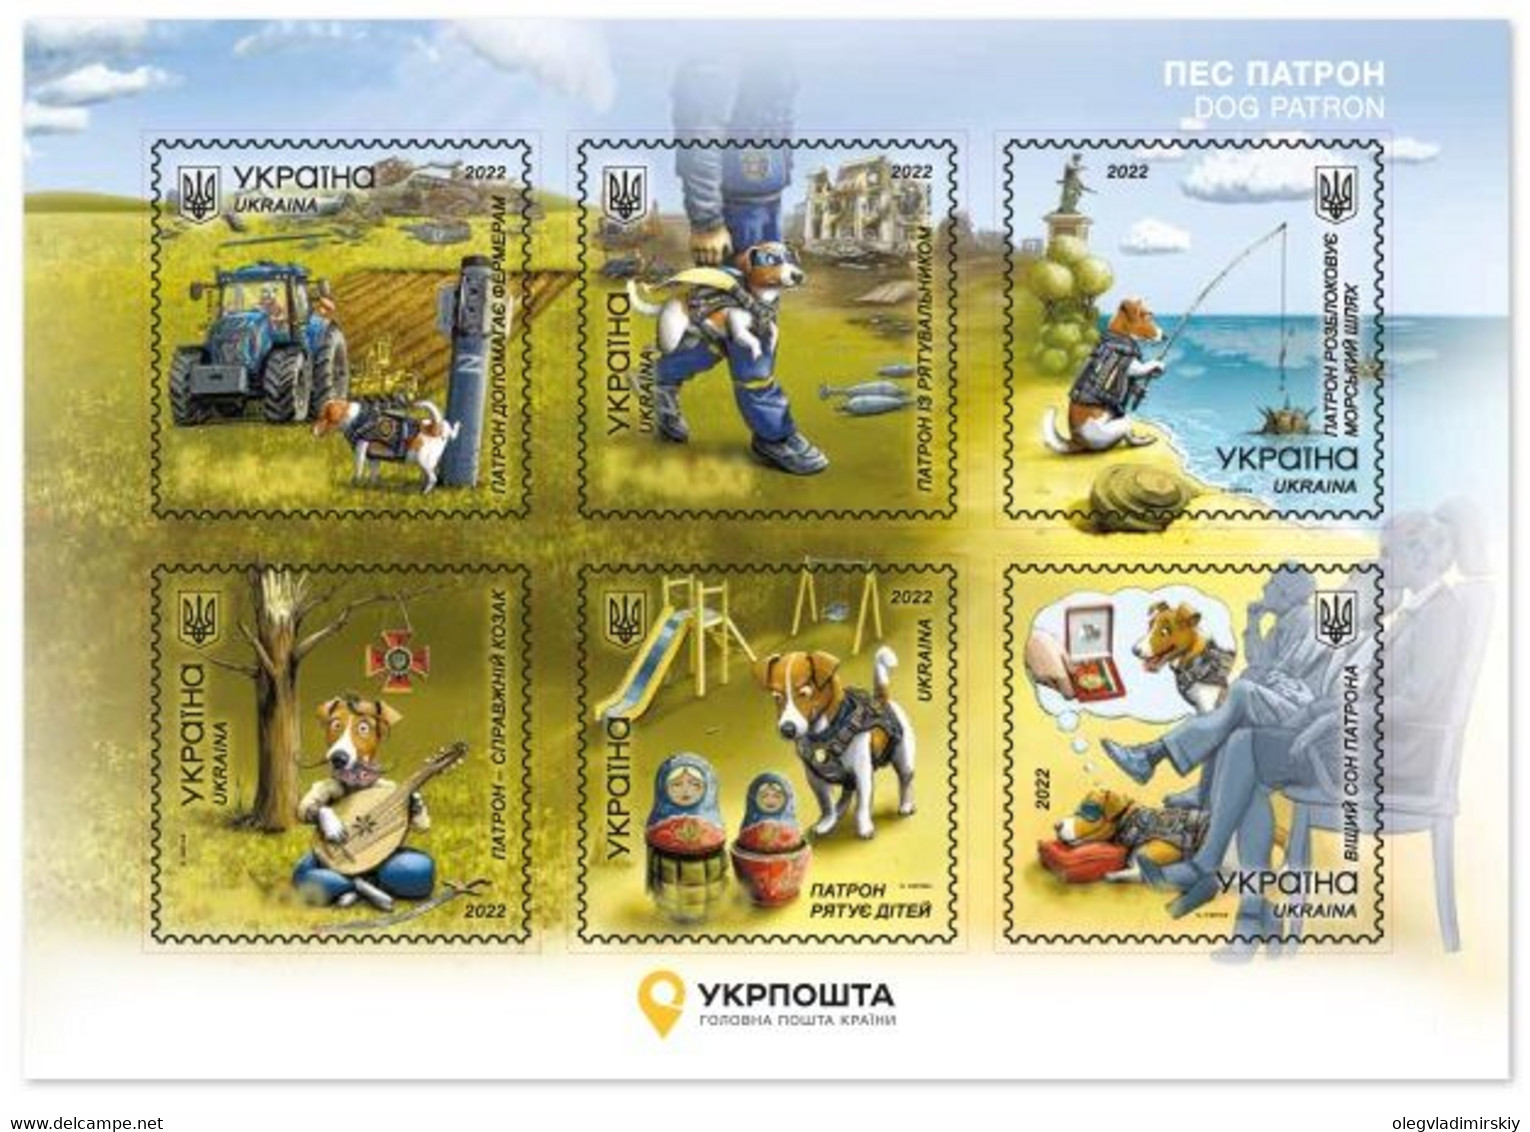 Ukraine 2022 The Famous Sapper Dog Patron - Army Assistant Postal Charity Issue Set Of 6 Non-postage Stamps In A Block - Dolls